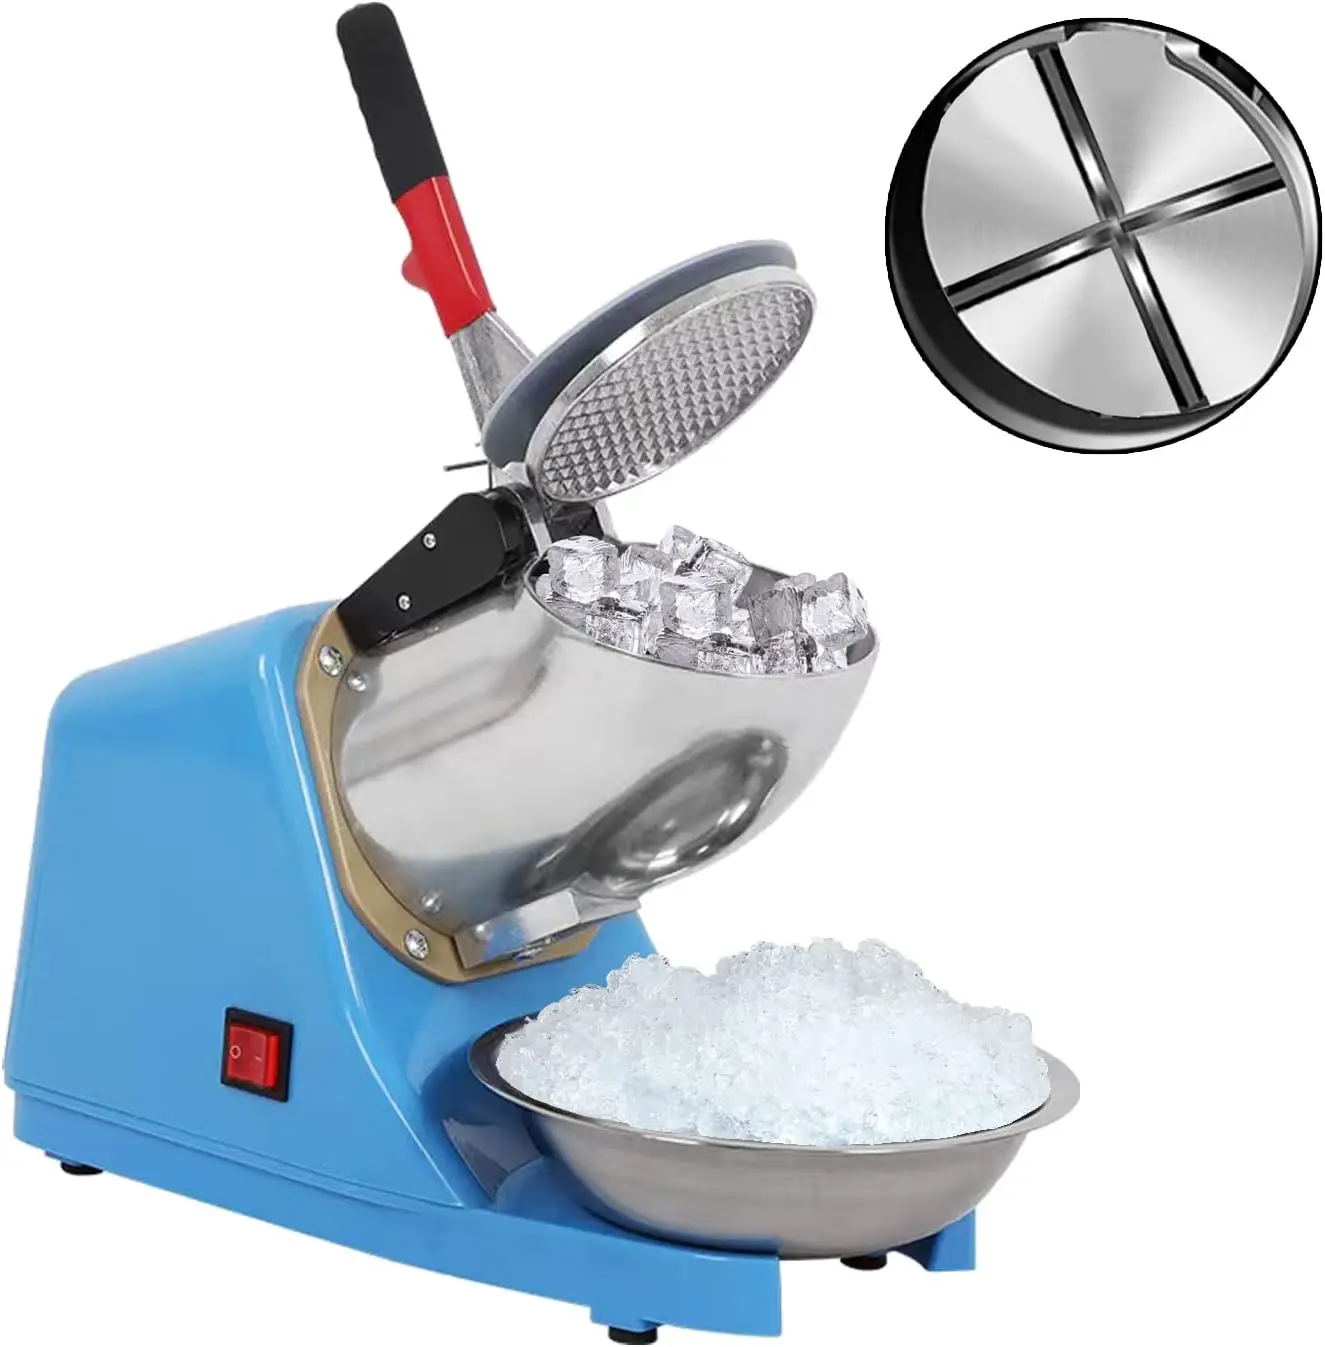 

Ice Shaver Crusher,Portable Stainless Steel 4 Blades Ice Shaved Machine,300W 2200RPM Snow Cone Maker Shaved Ice Maker with Ice P